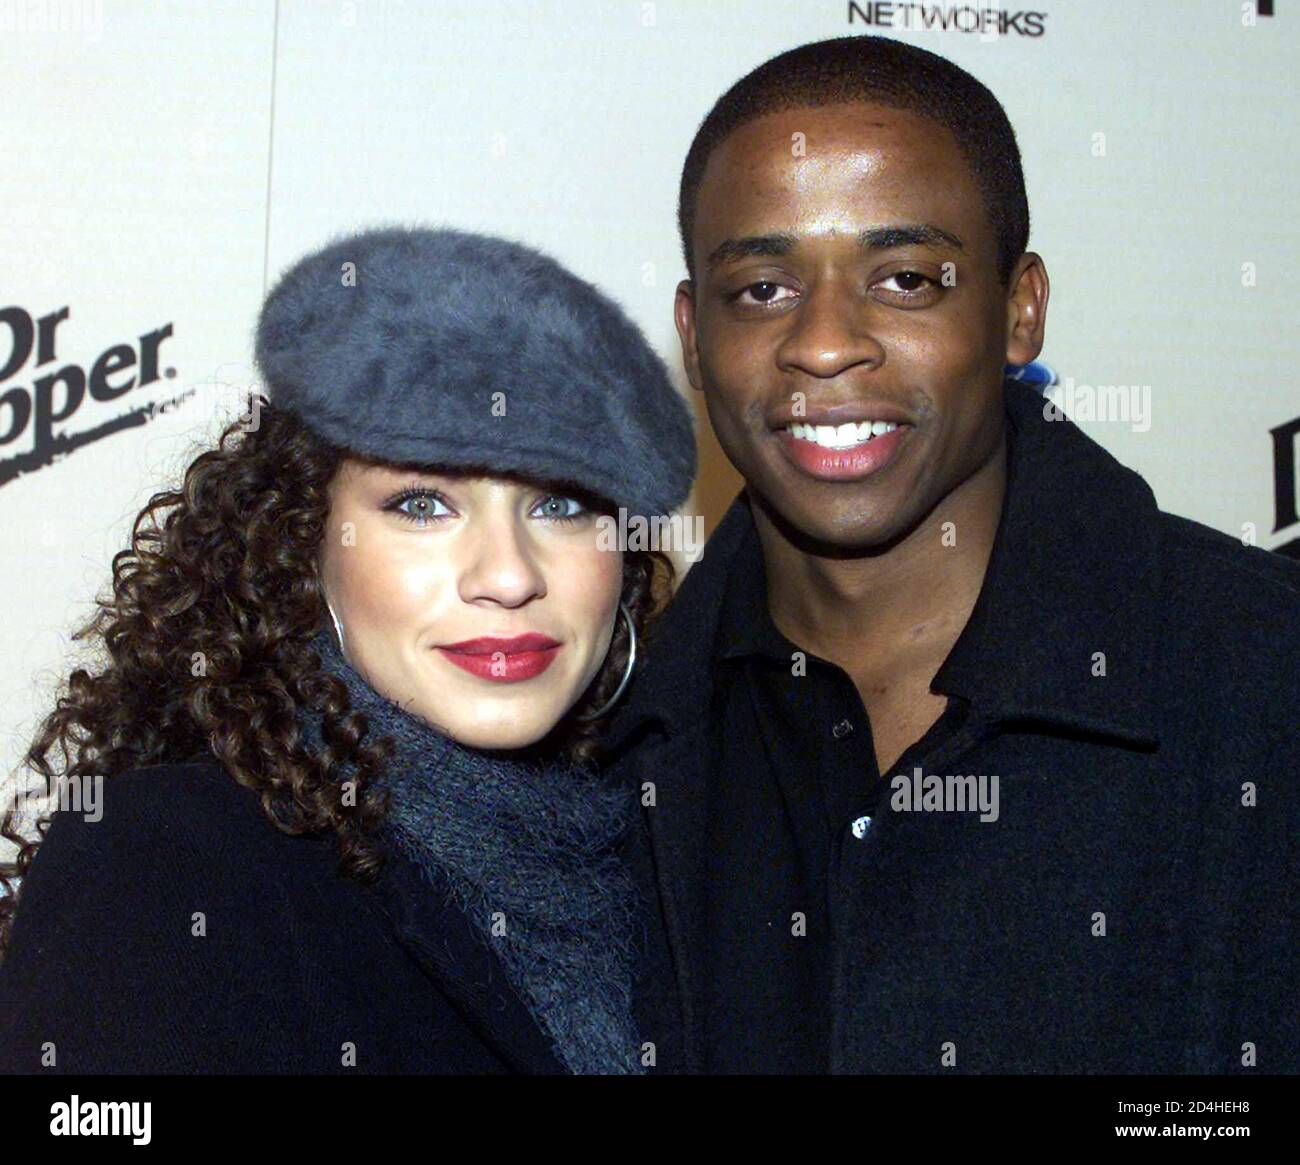 Actor Dule Hill and girlfreind actress Nicole Lyn pose as they arrive as  guests at the E! Online Sizzlin' 16 party, January 30, 2002 in Hollywood. [The party honored 16 'twenty-something' actors who are deemed rising stars in Hollywood. Hill is featured in the drama television series 'The West Wing.'] Stock Photo